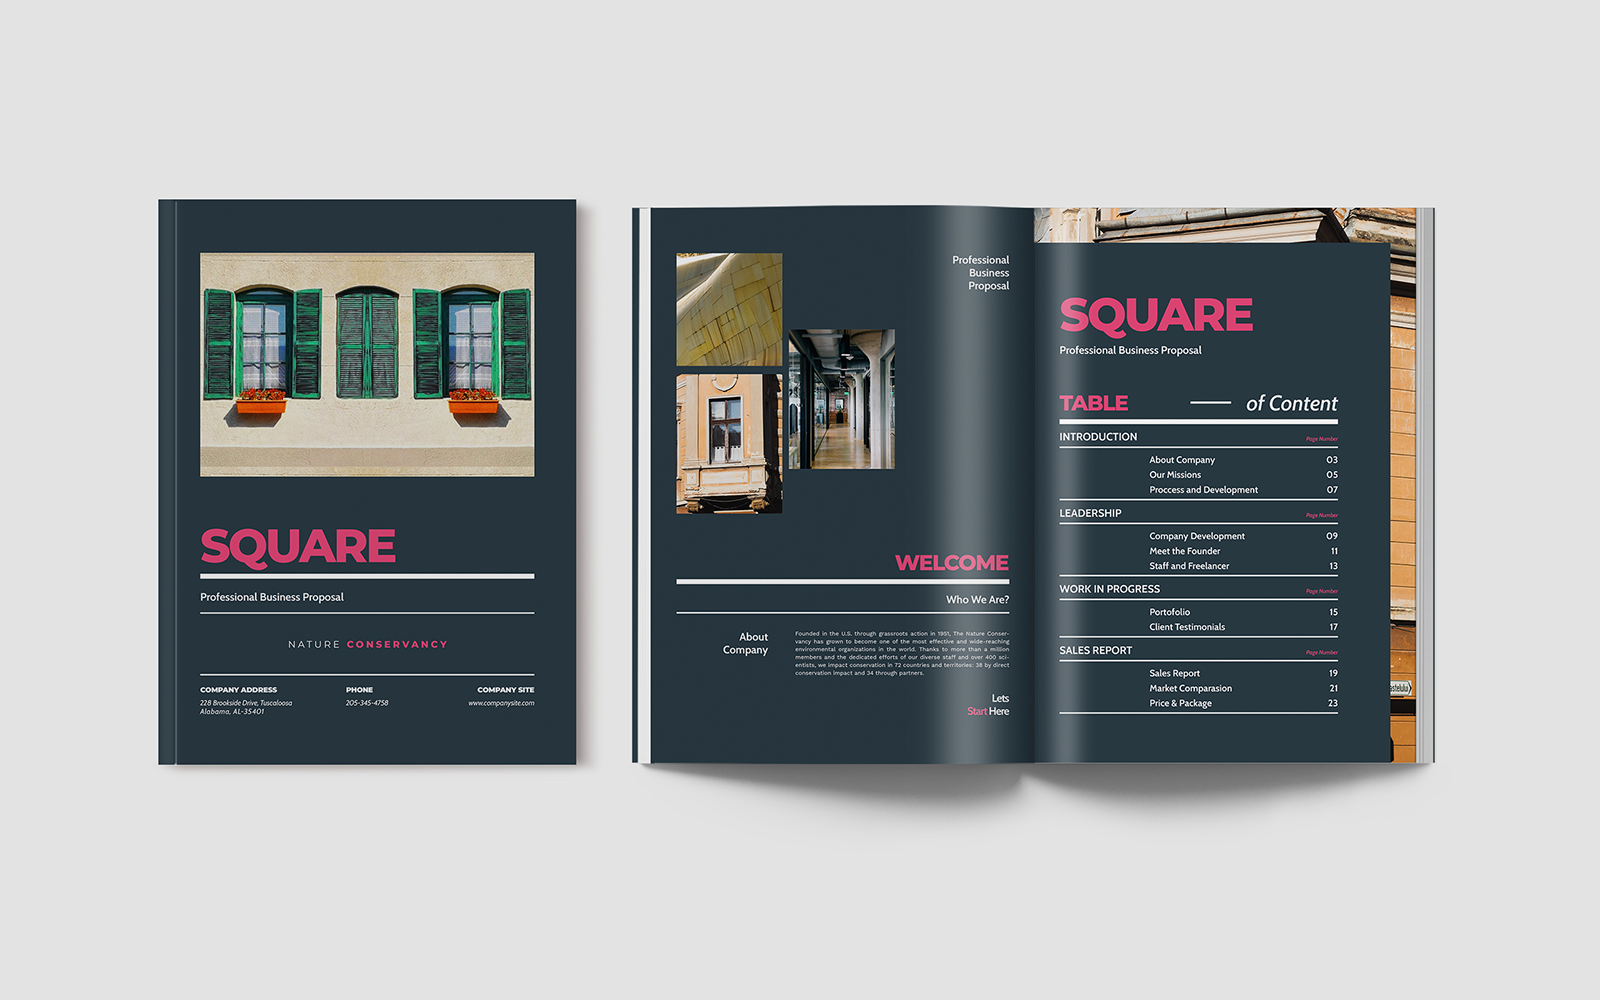 Square Business Proposal Indesign